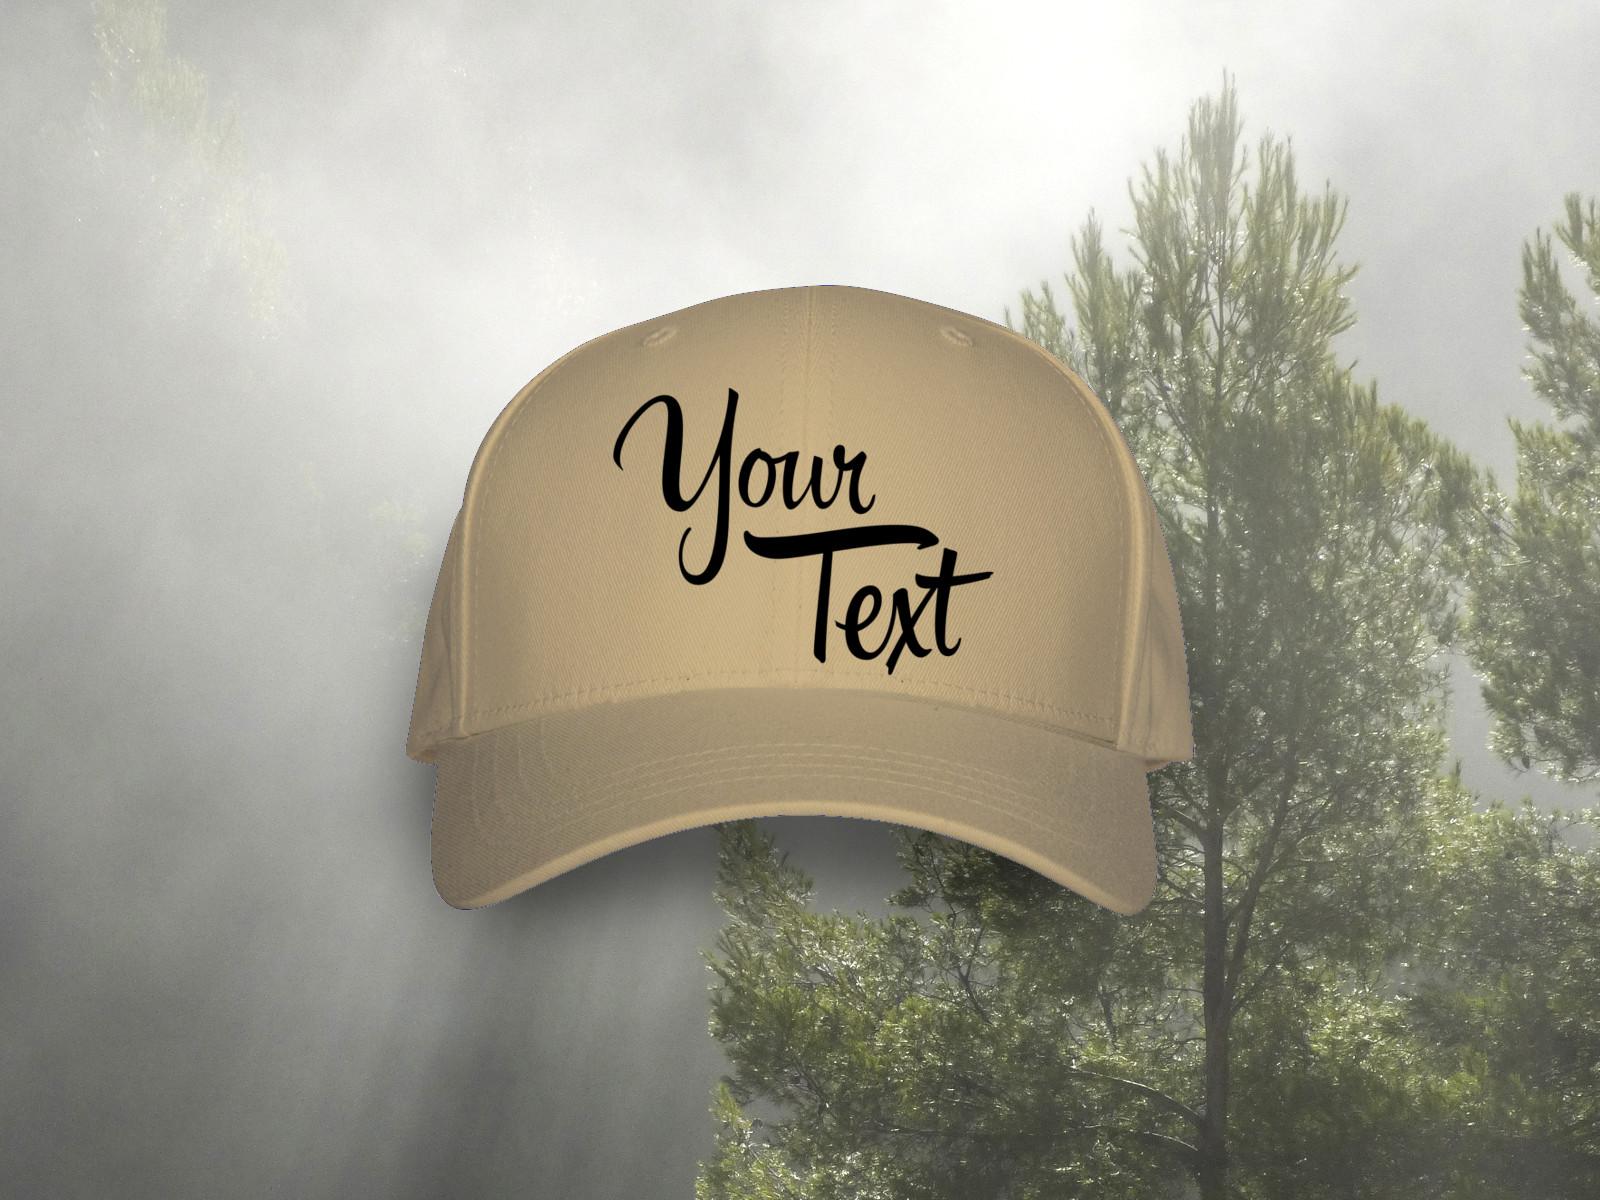 Personalized Hats - Made in Metchosin